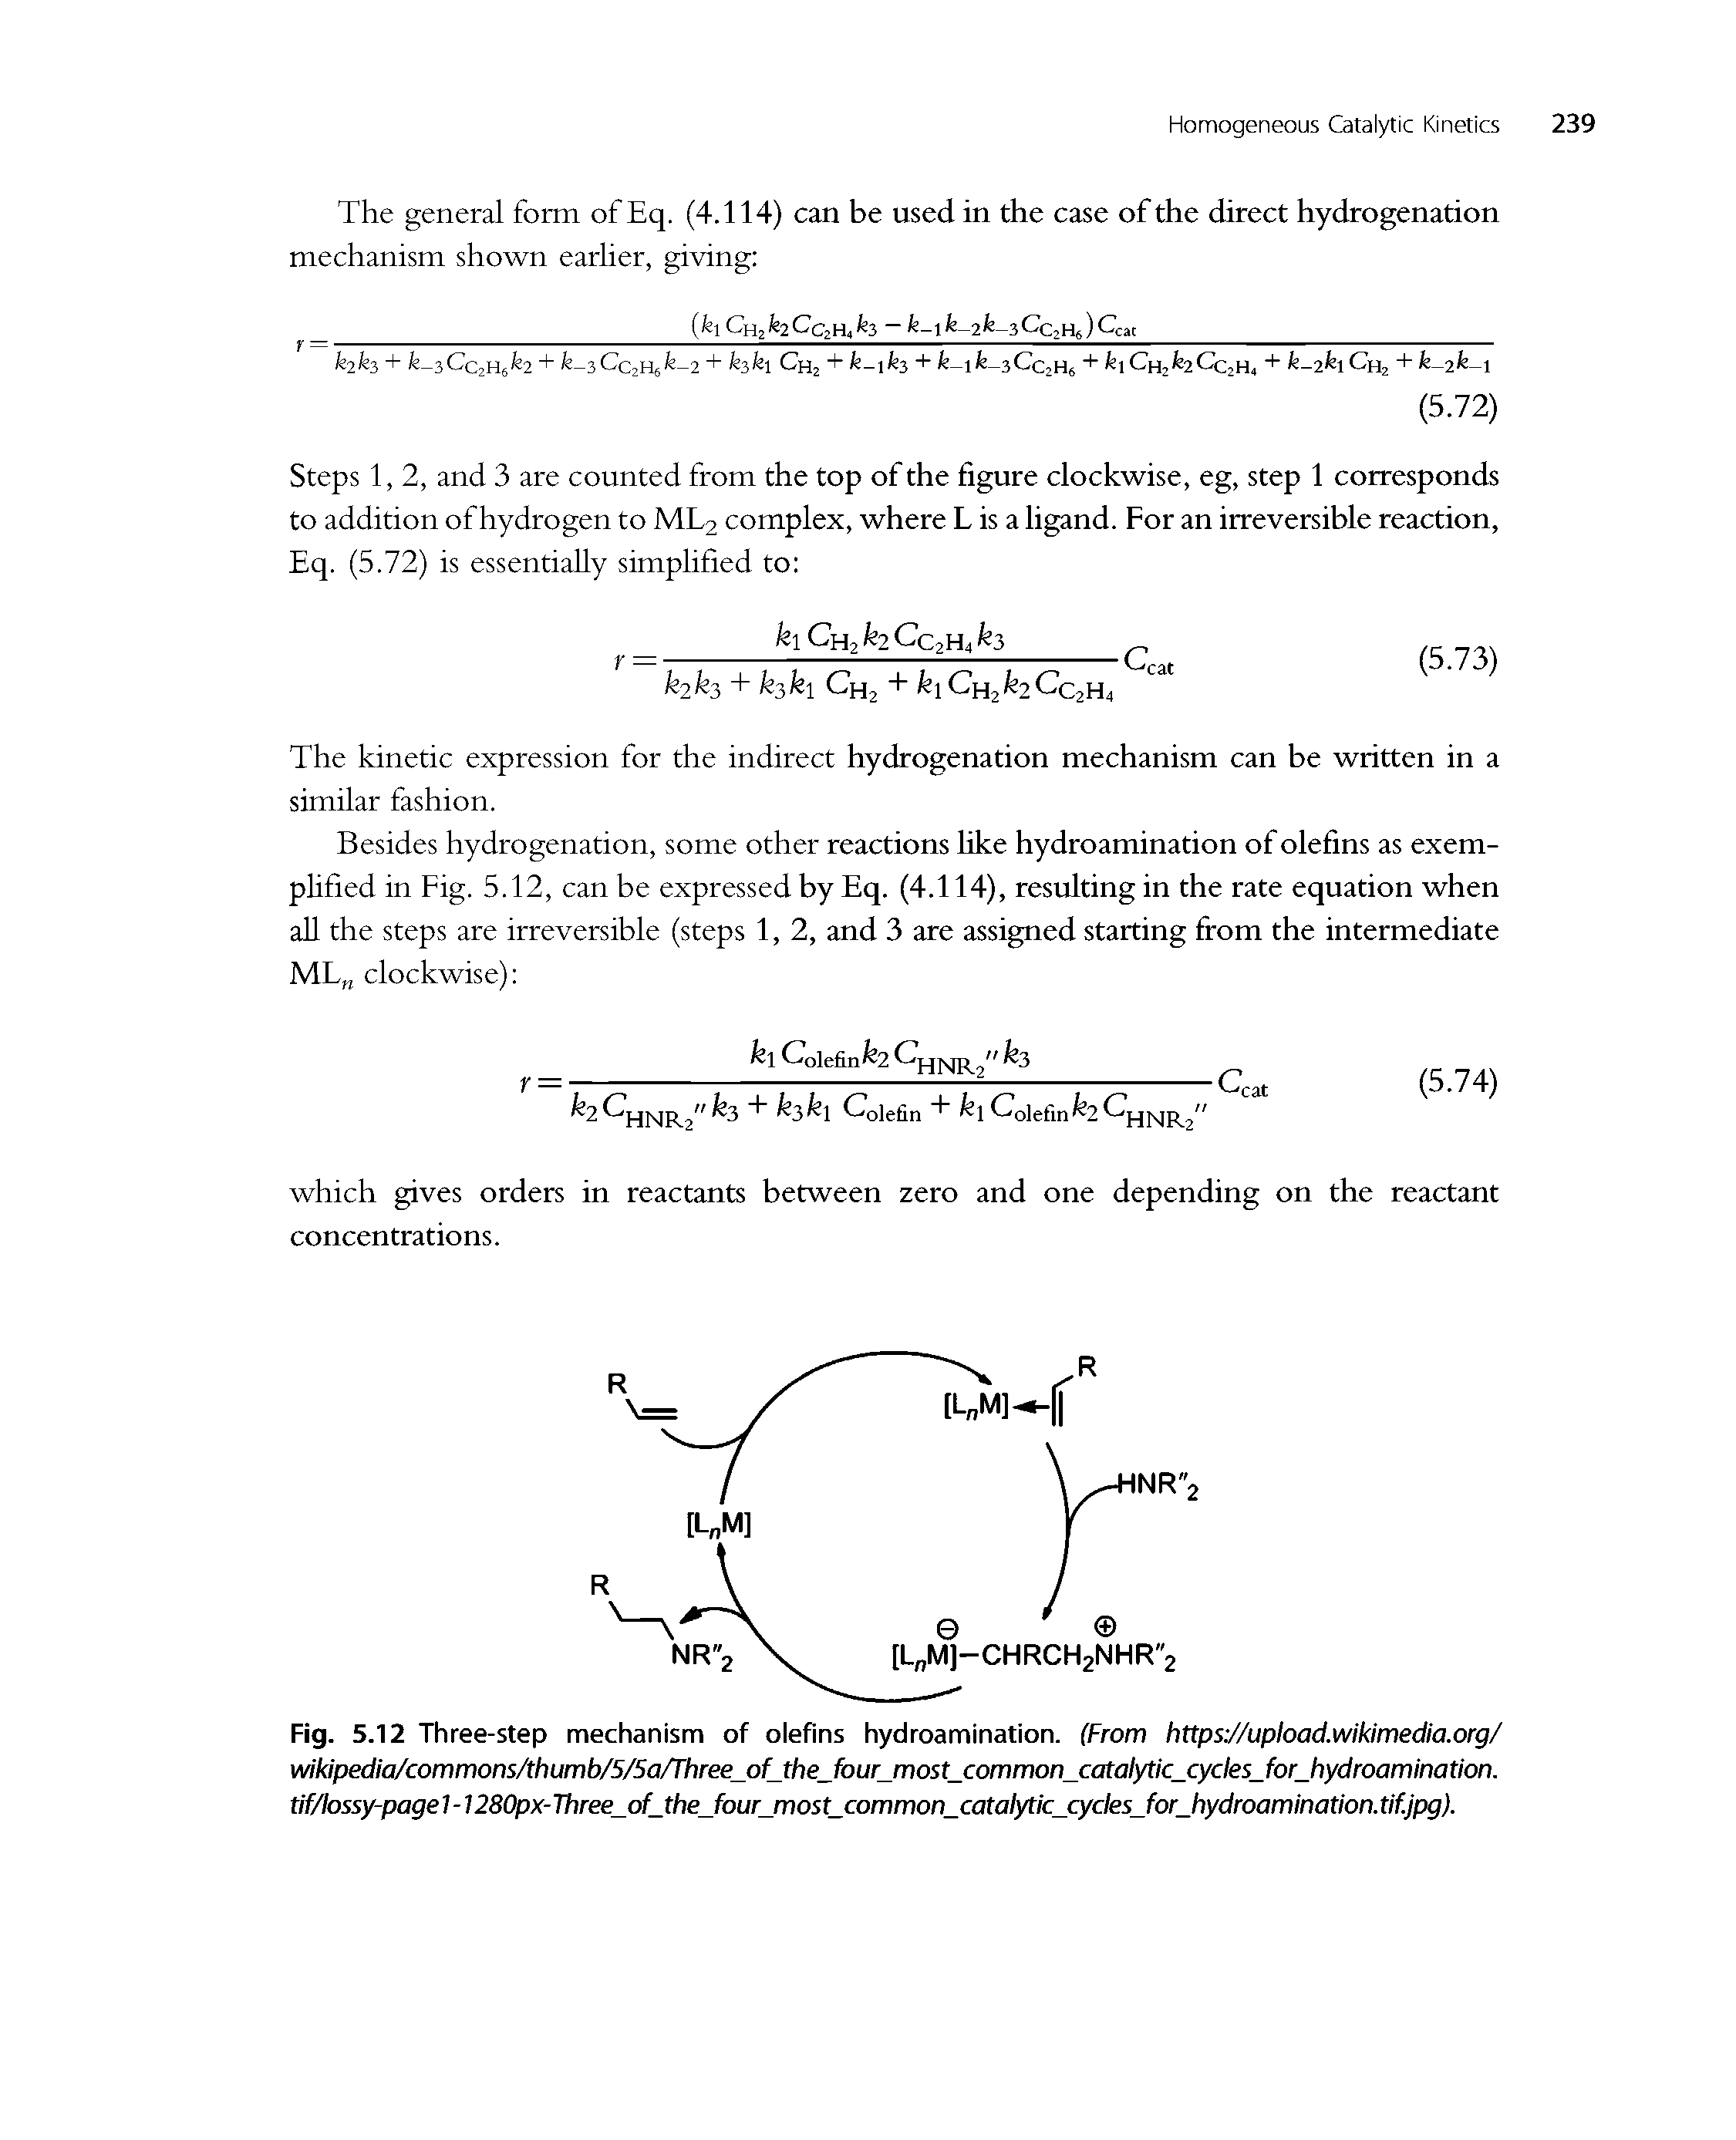 Fig. 5.12 Three-step mechanism of olefins hydroamination. (From https //upload.wikimeclia.org/ wikipedia/commonsAhumb/5/5a/rhree of the four most comrr on catalytic cycles for hydroamination. tif/k)ssy-page1-1280px-Three of the four most comrrK>n catalytic cycles for hydroamination.tif.jpg).